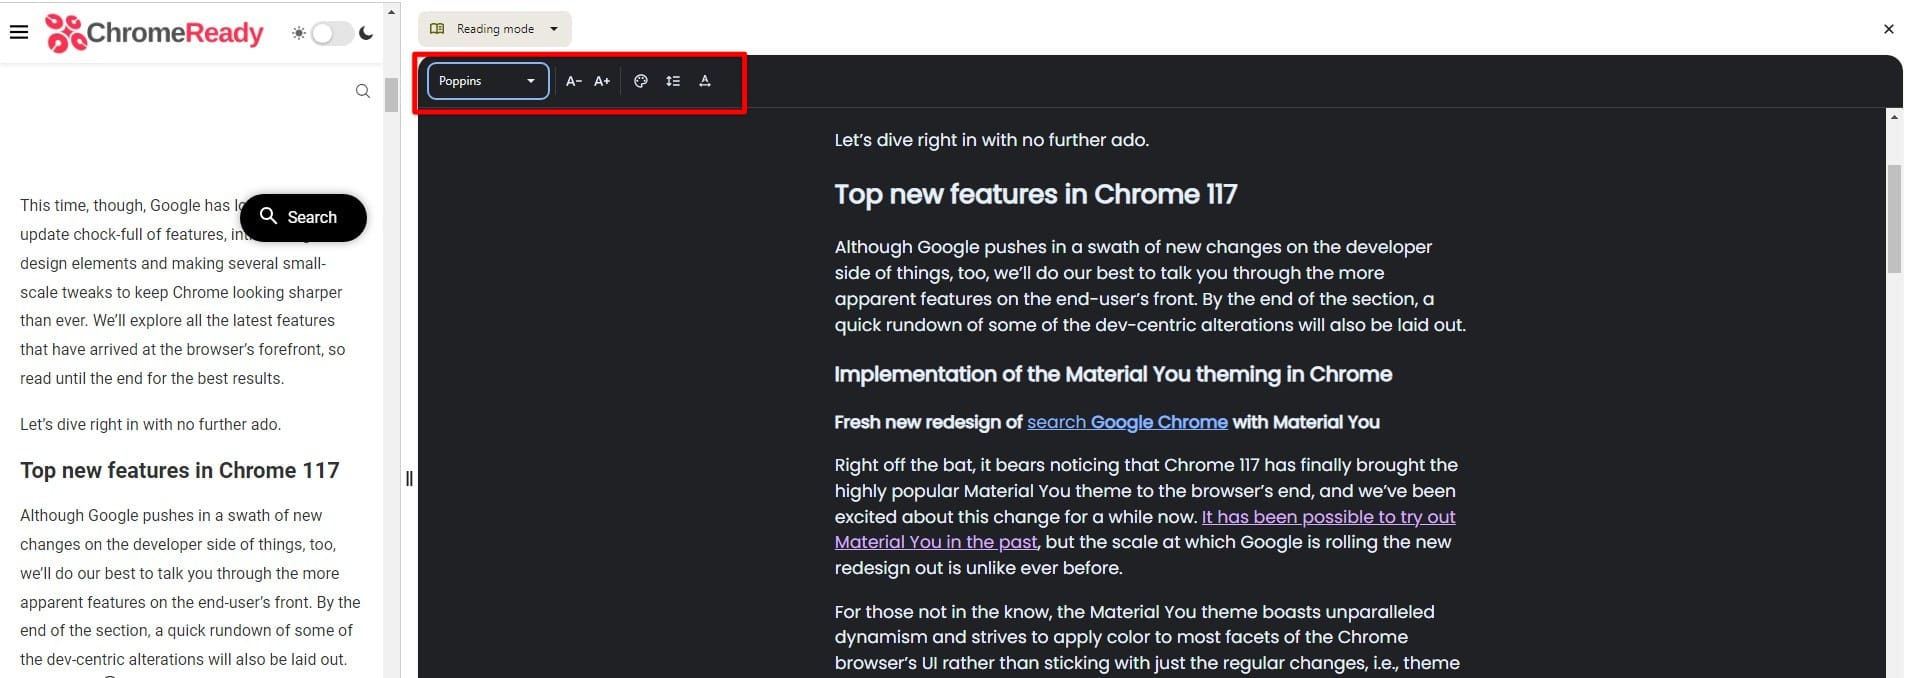 Customizing the Reading Mode feature in Chrome